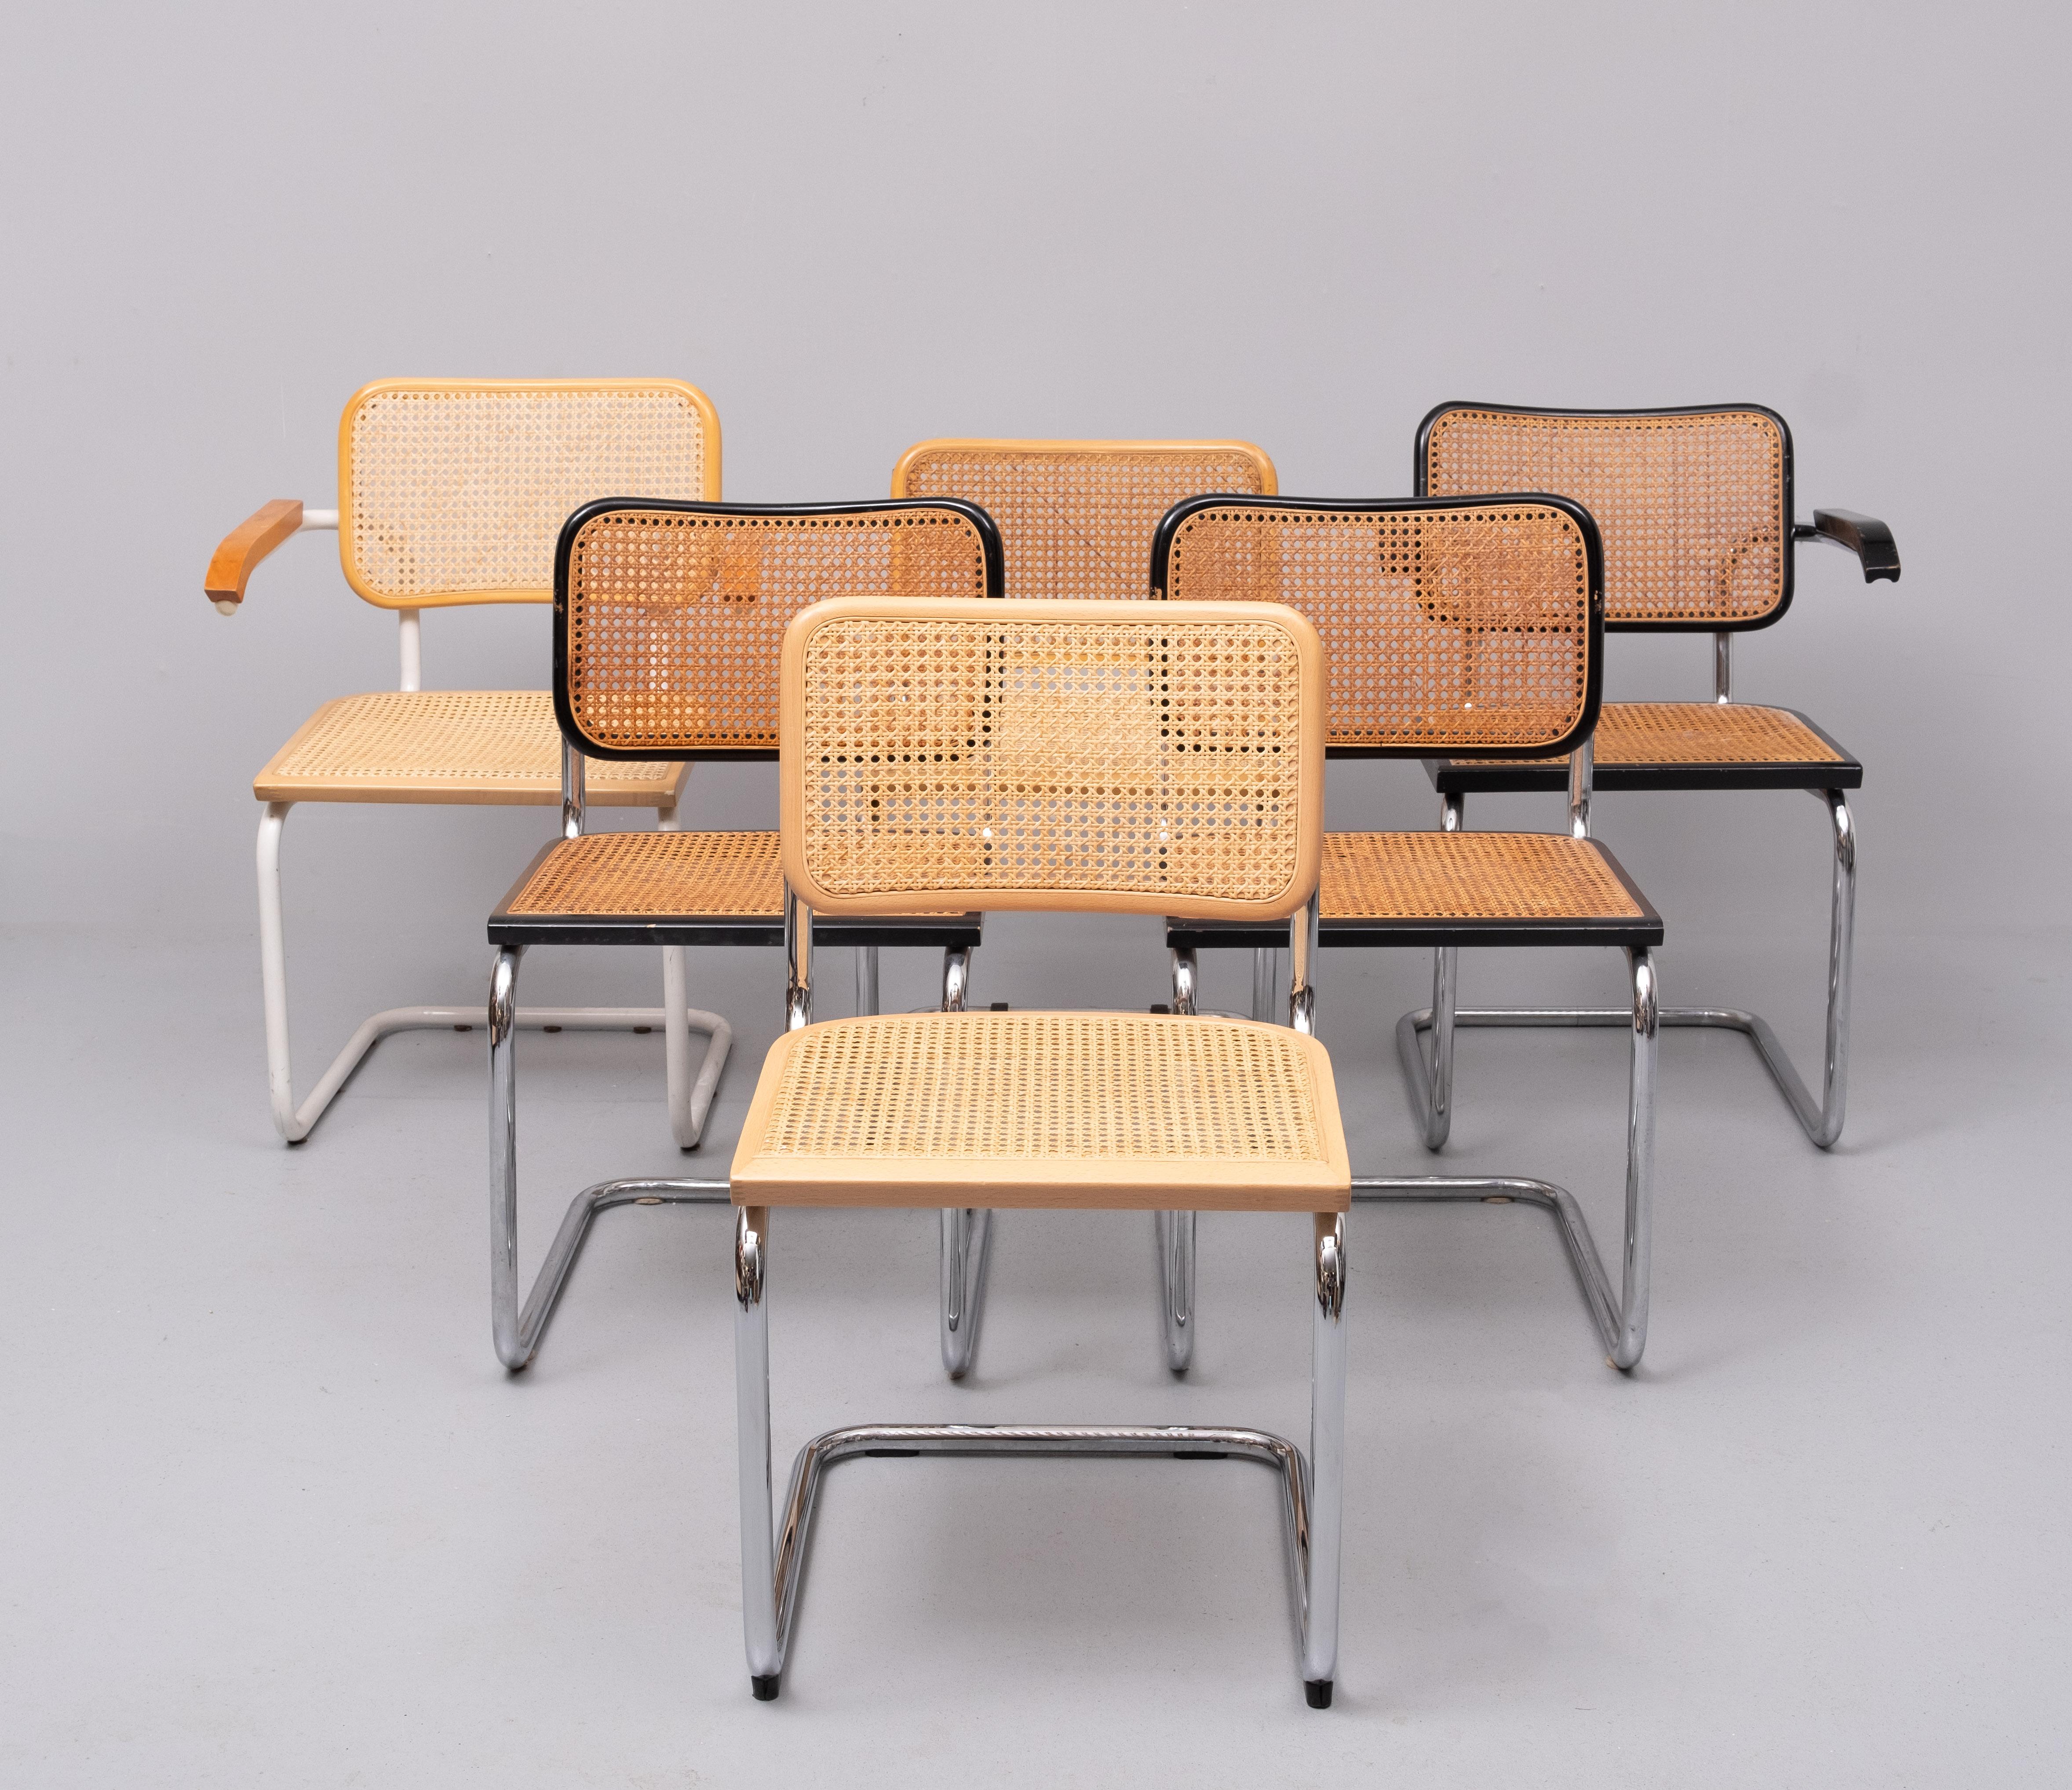 For sale 6 Marcel Breuer cantilever chairs ,2 Armchairs one signed 
4 without armrests . one signed Fasem . Its a bit off a mismatch , 
Looking nice .3 Black 3 Natural.   one of the Black chairs have a little damage , see photos  . 1970s  